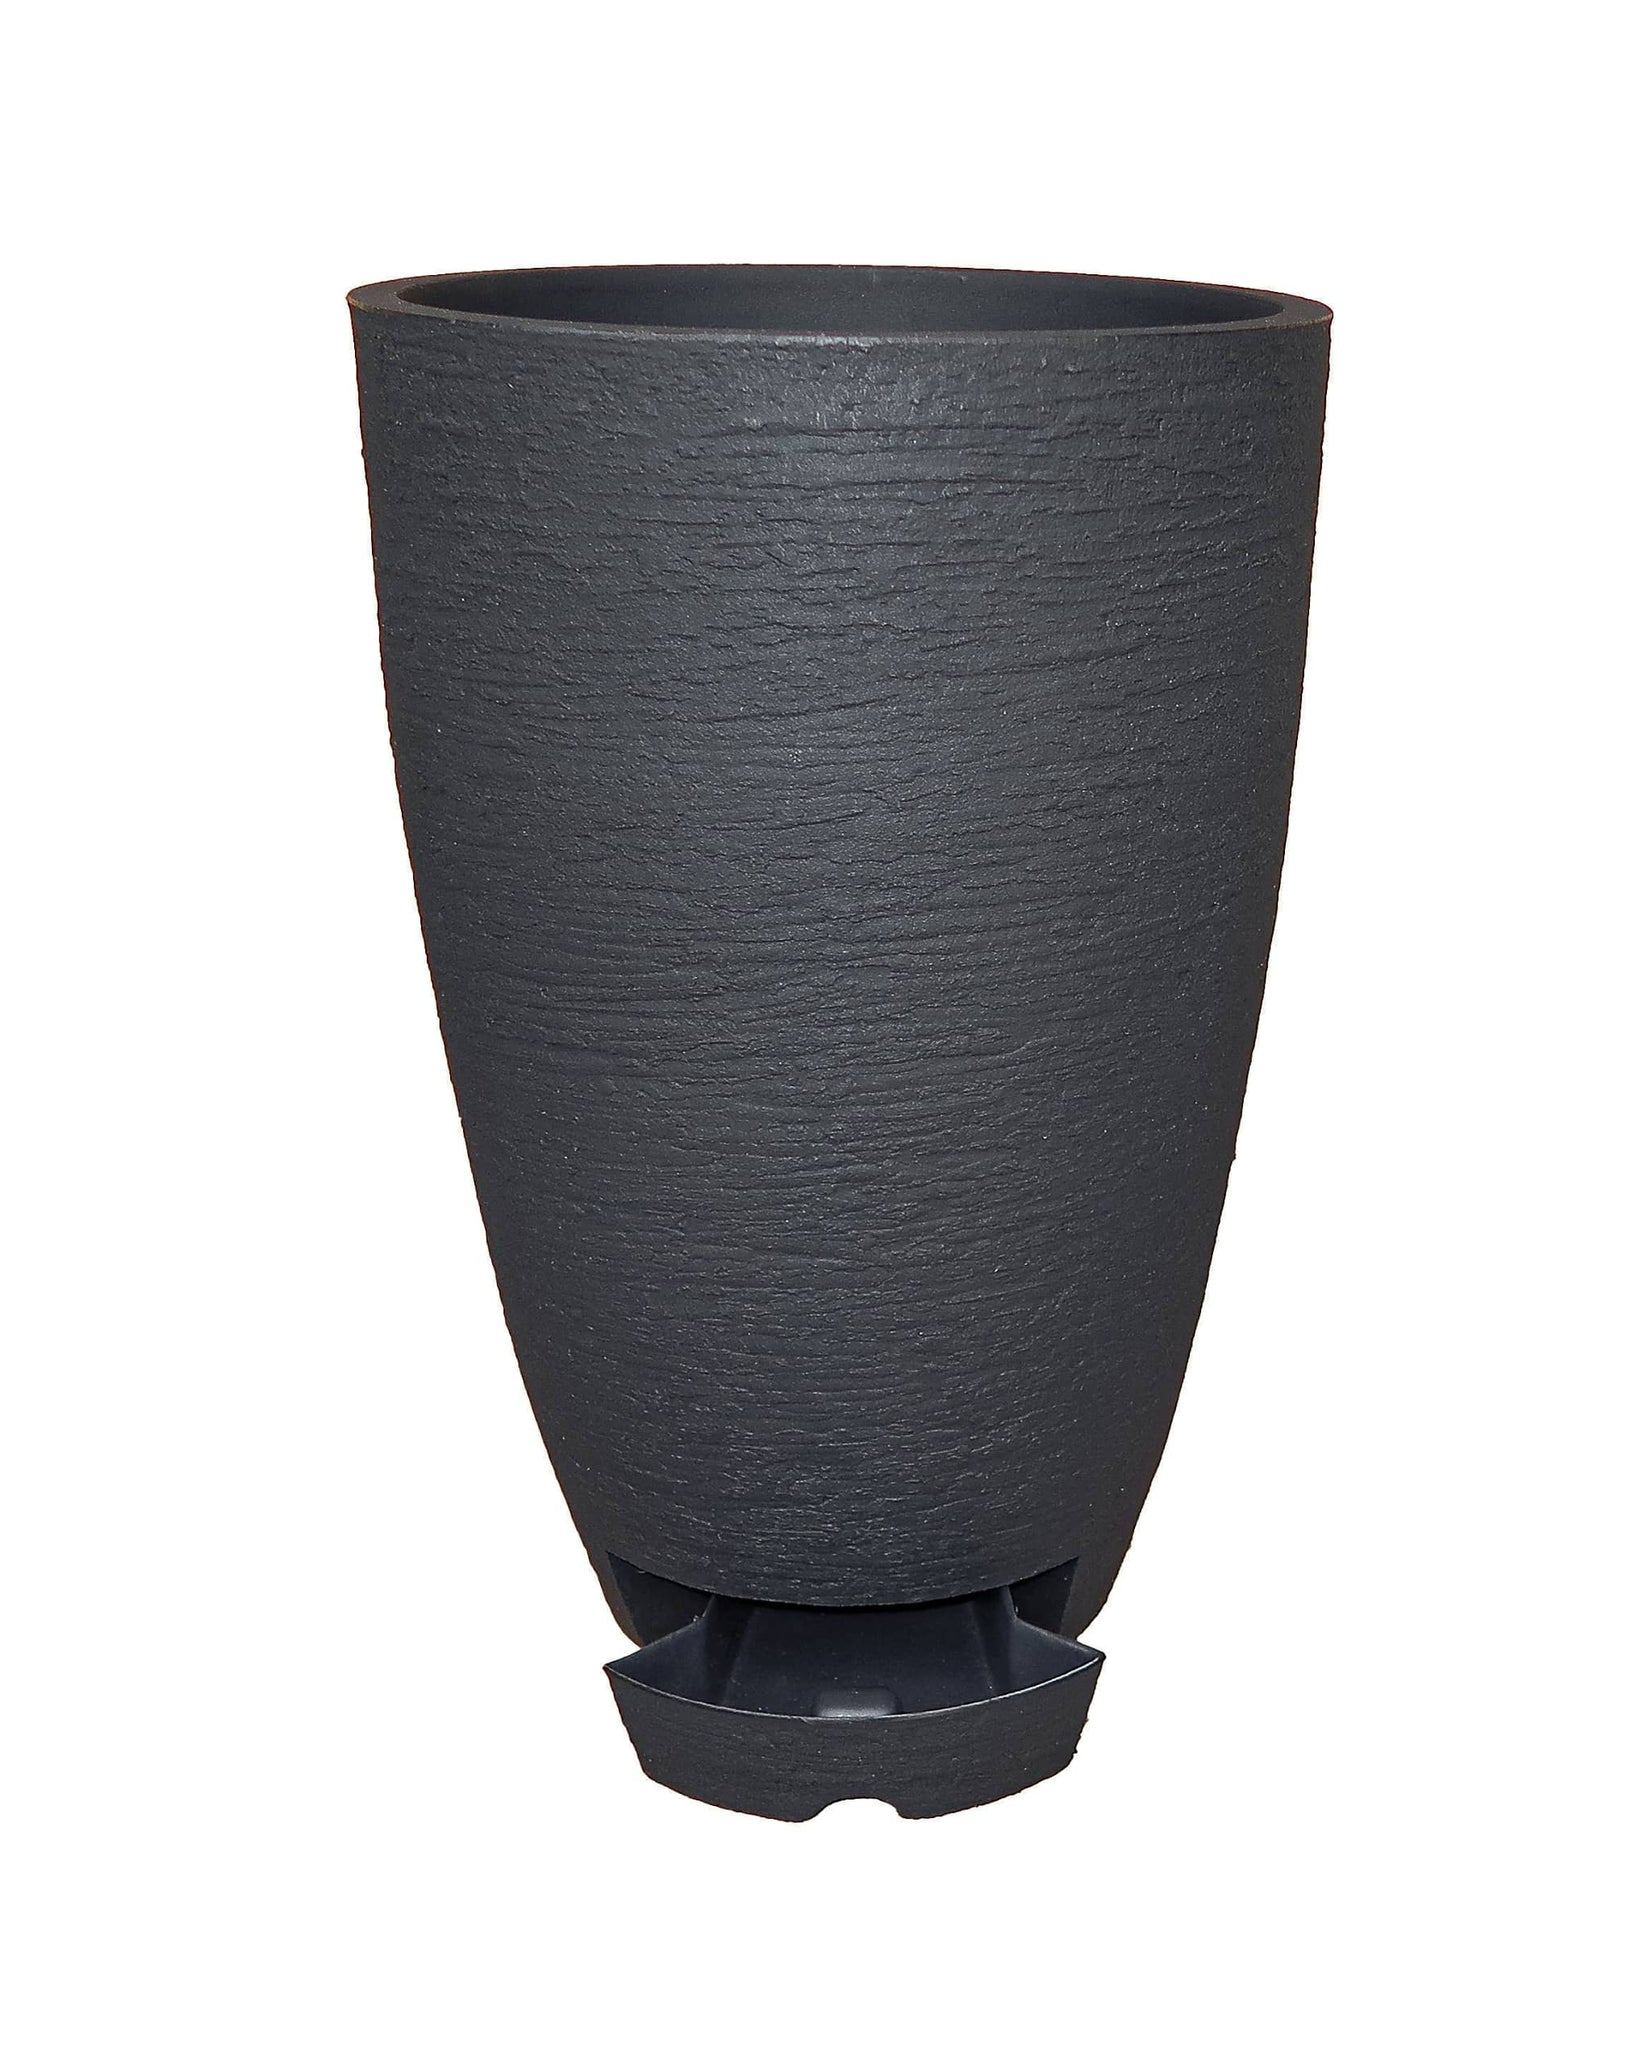 Modern Coni round upright planter with built in 'slide out' drip tray